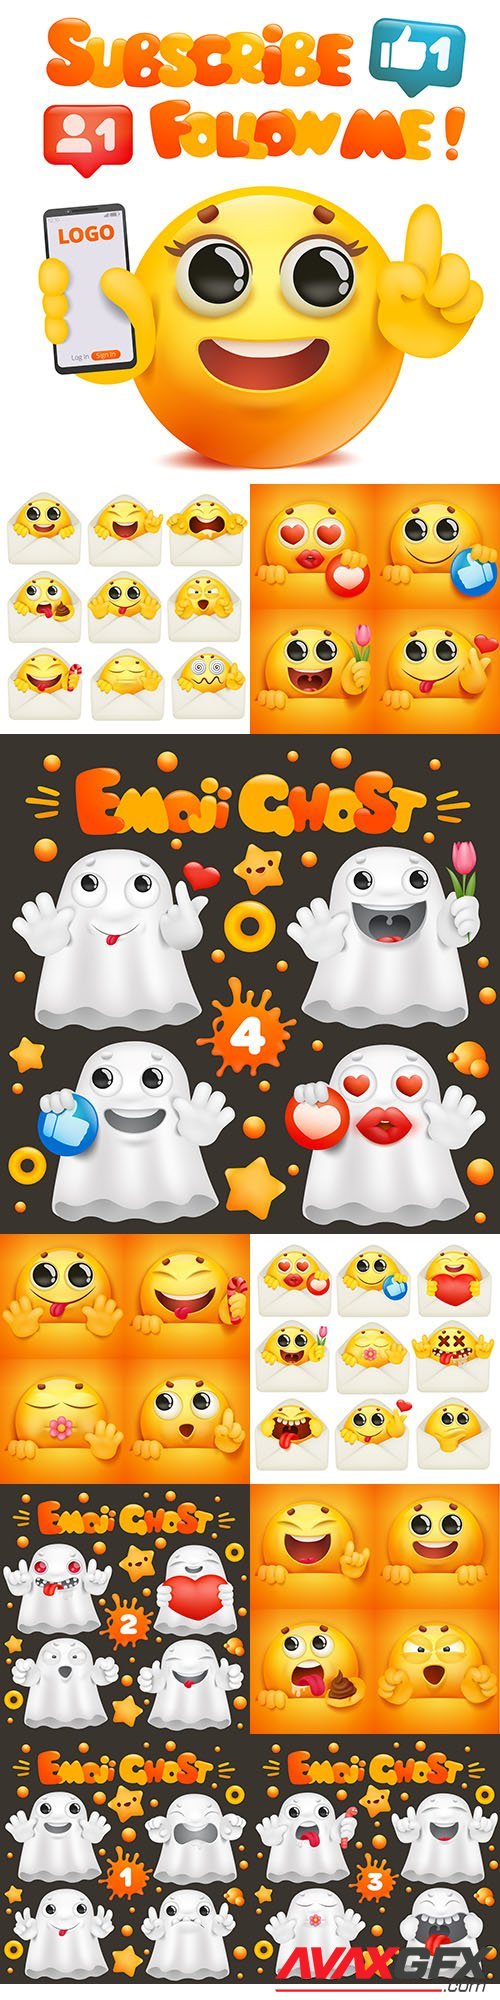 Yellow smiley and cute ghost in various emotions and situations